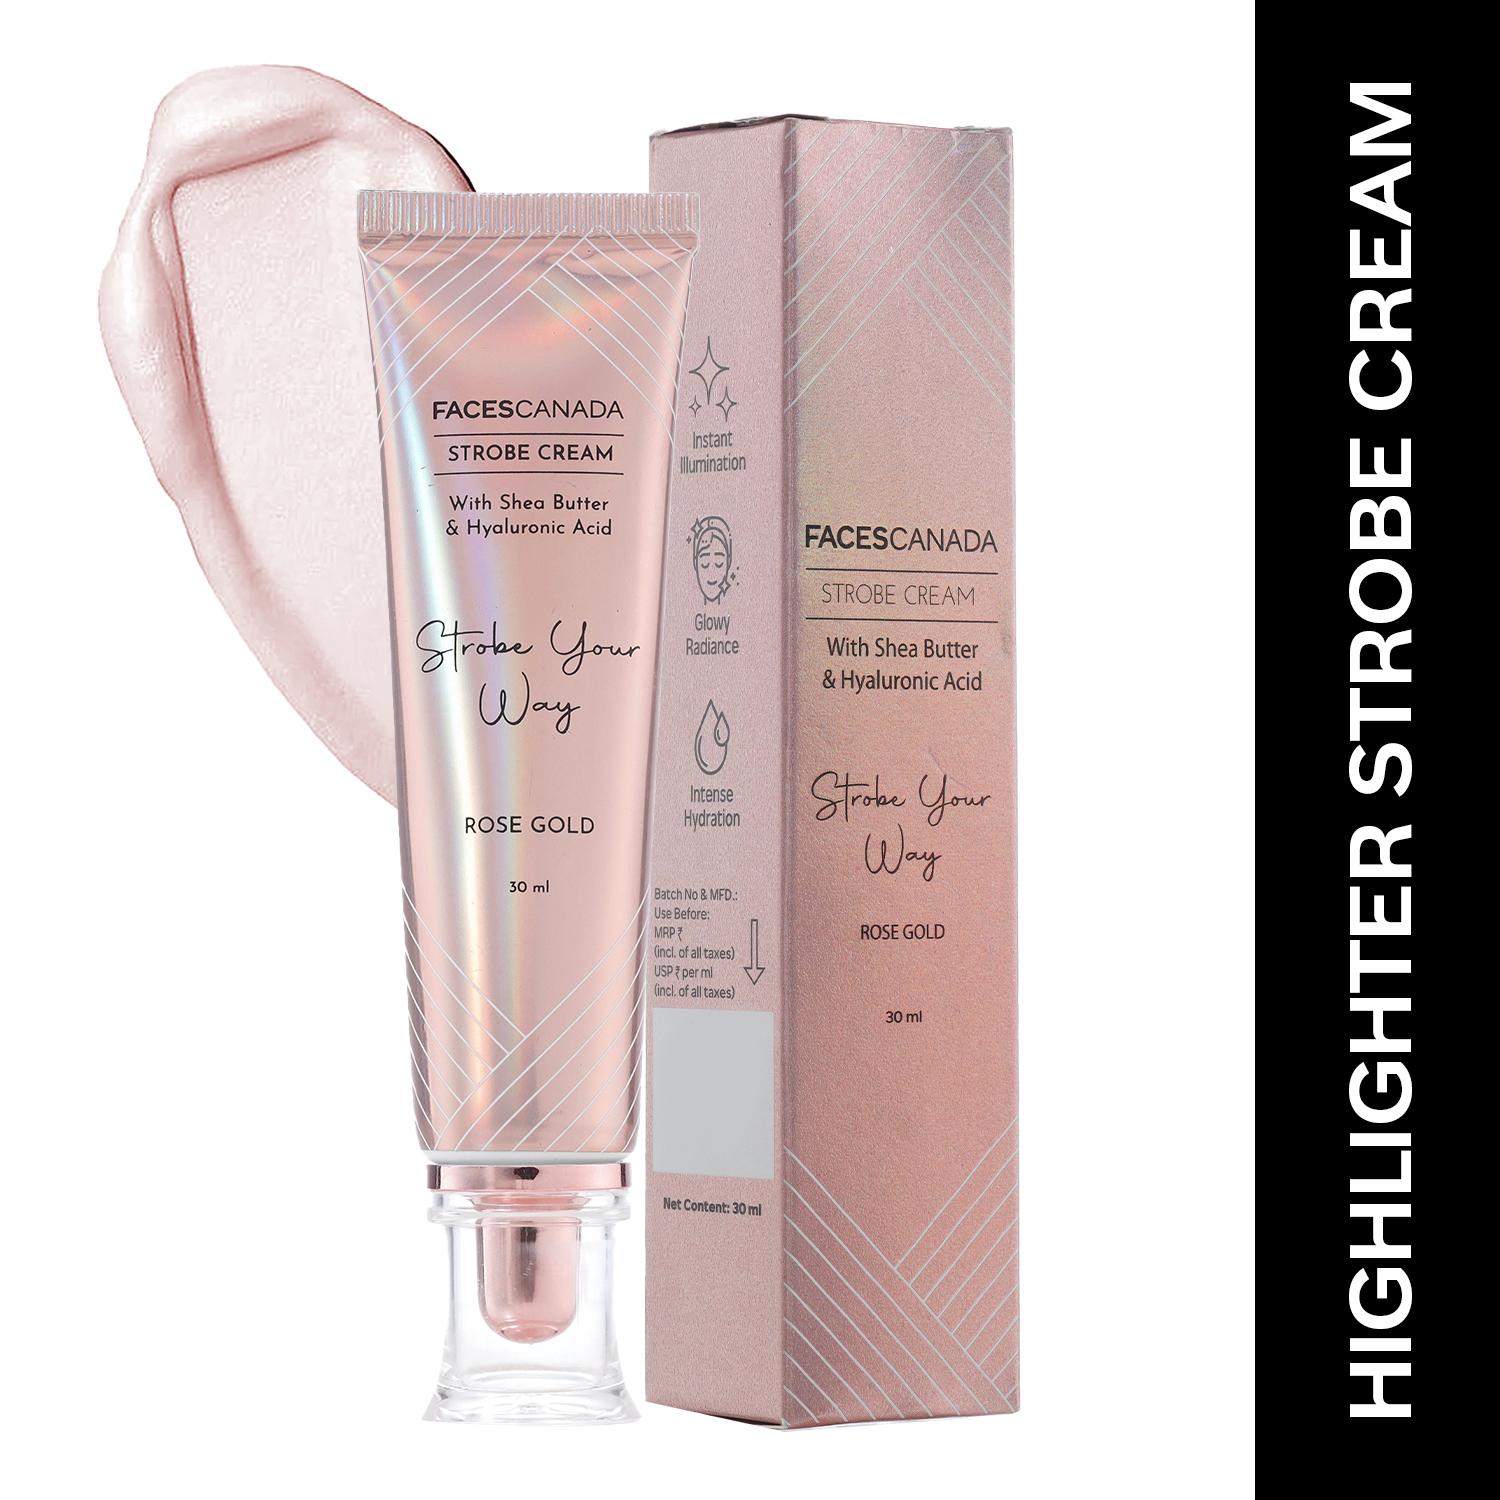 Faces Canada | Faces Canada Strobe Cream, Shea Butter & Hyaluronic Acid,Flawless Radiant Skin - Rose Gold (30 g)